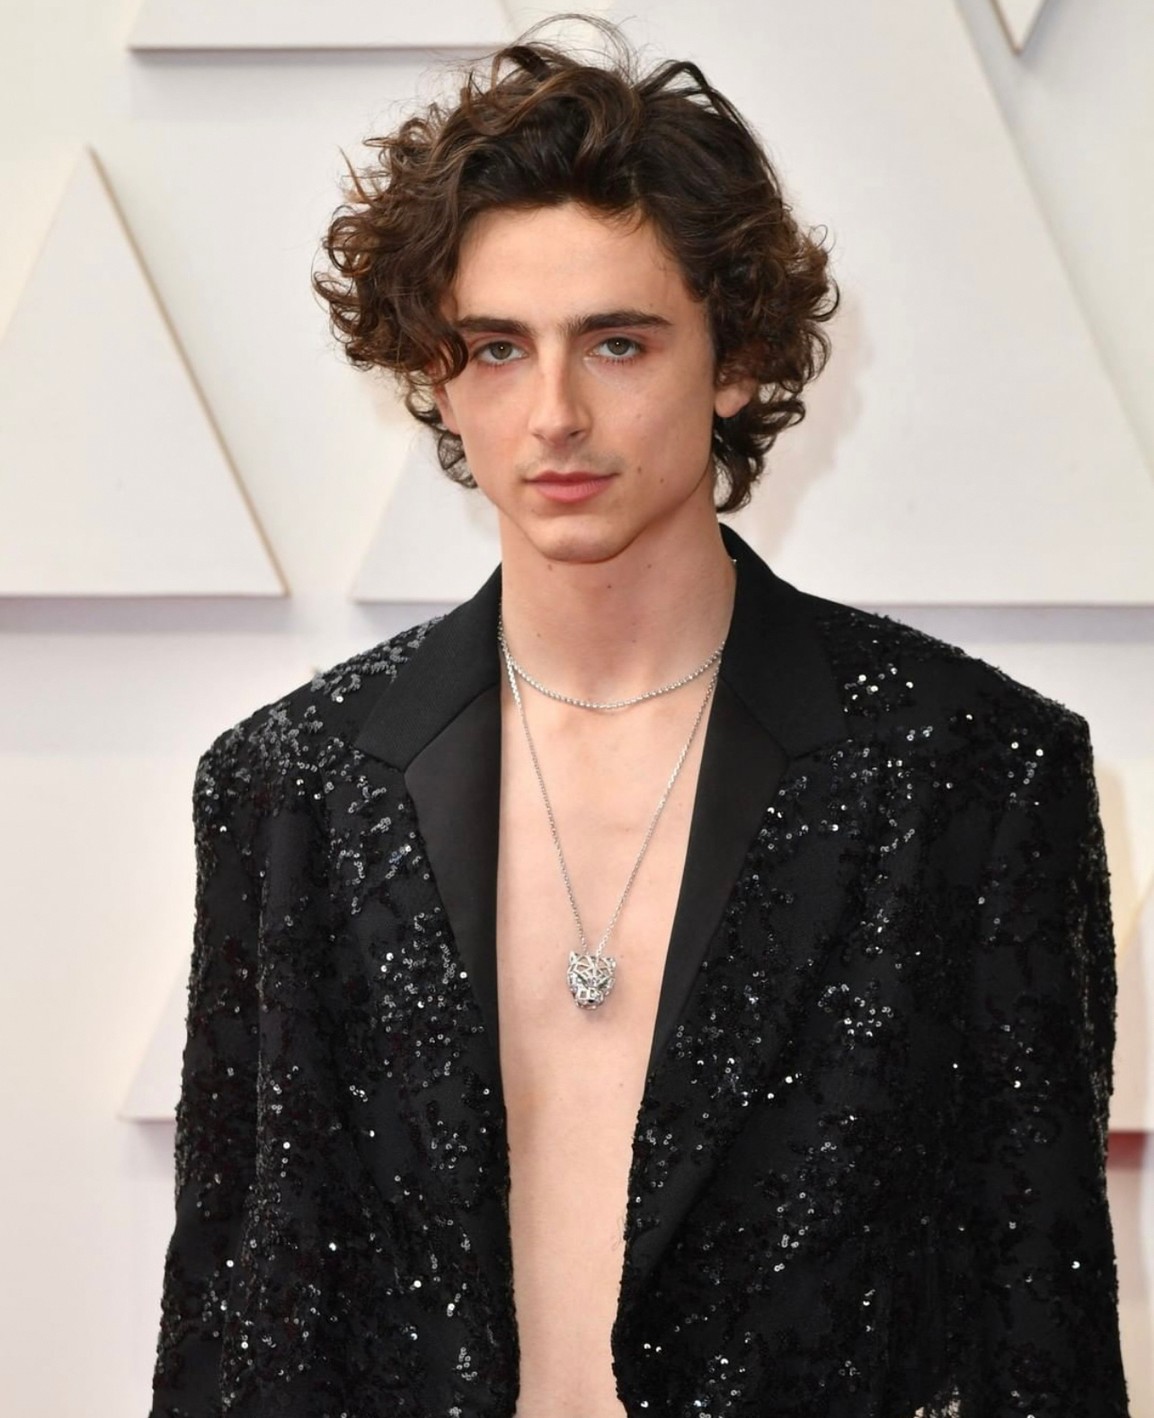 Timothee-Chalame-Oscars-Cartier